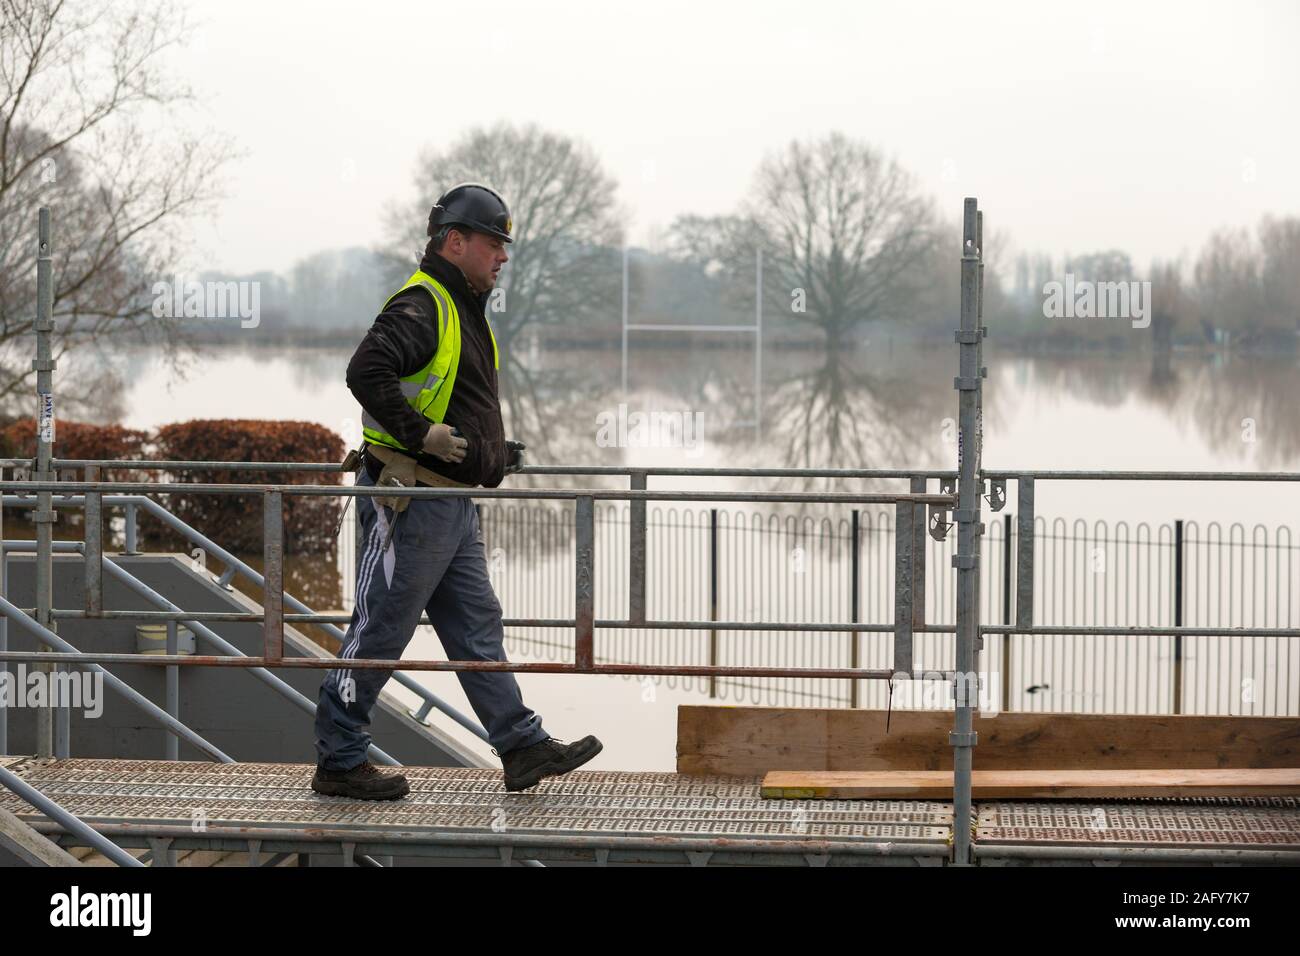 Worcester, Worcestershire, UK. 17th Dec, 2019. Worcester County cricket ground floods with water from the River Teme and is under several feet of water for the fifth time in 2019. Workmen put temporary walk boards to ease access to the ground's buildings. Credit: Peter Lopeman/Alamy Live News Stock Photo